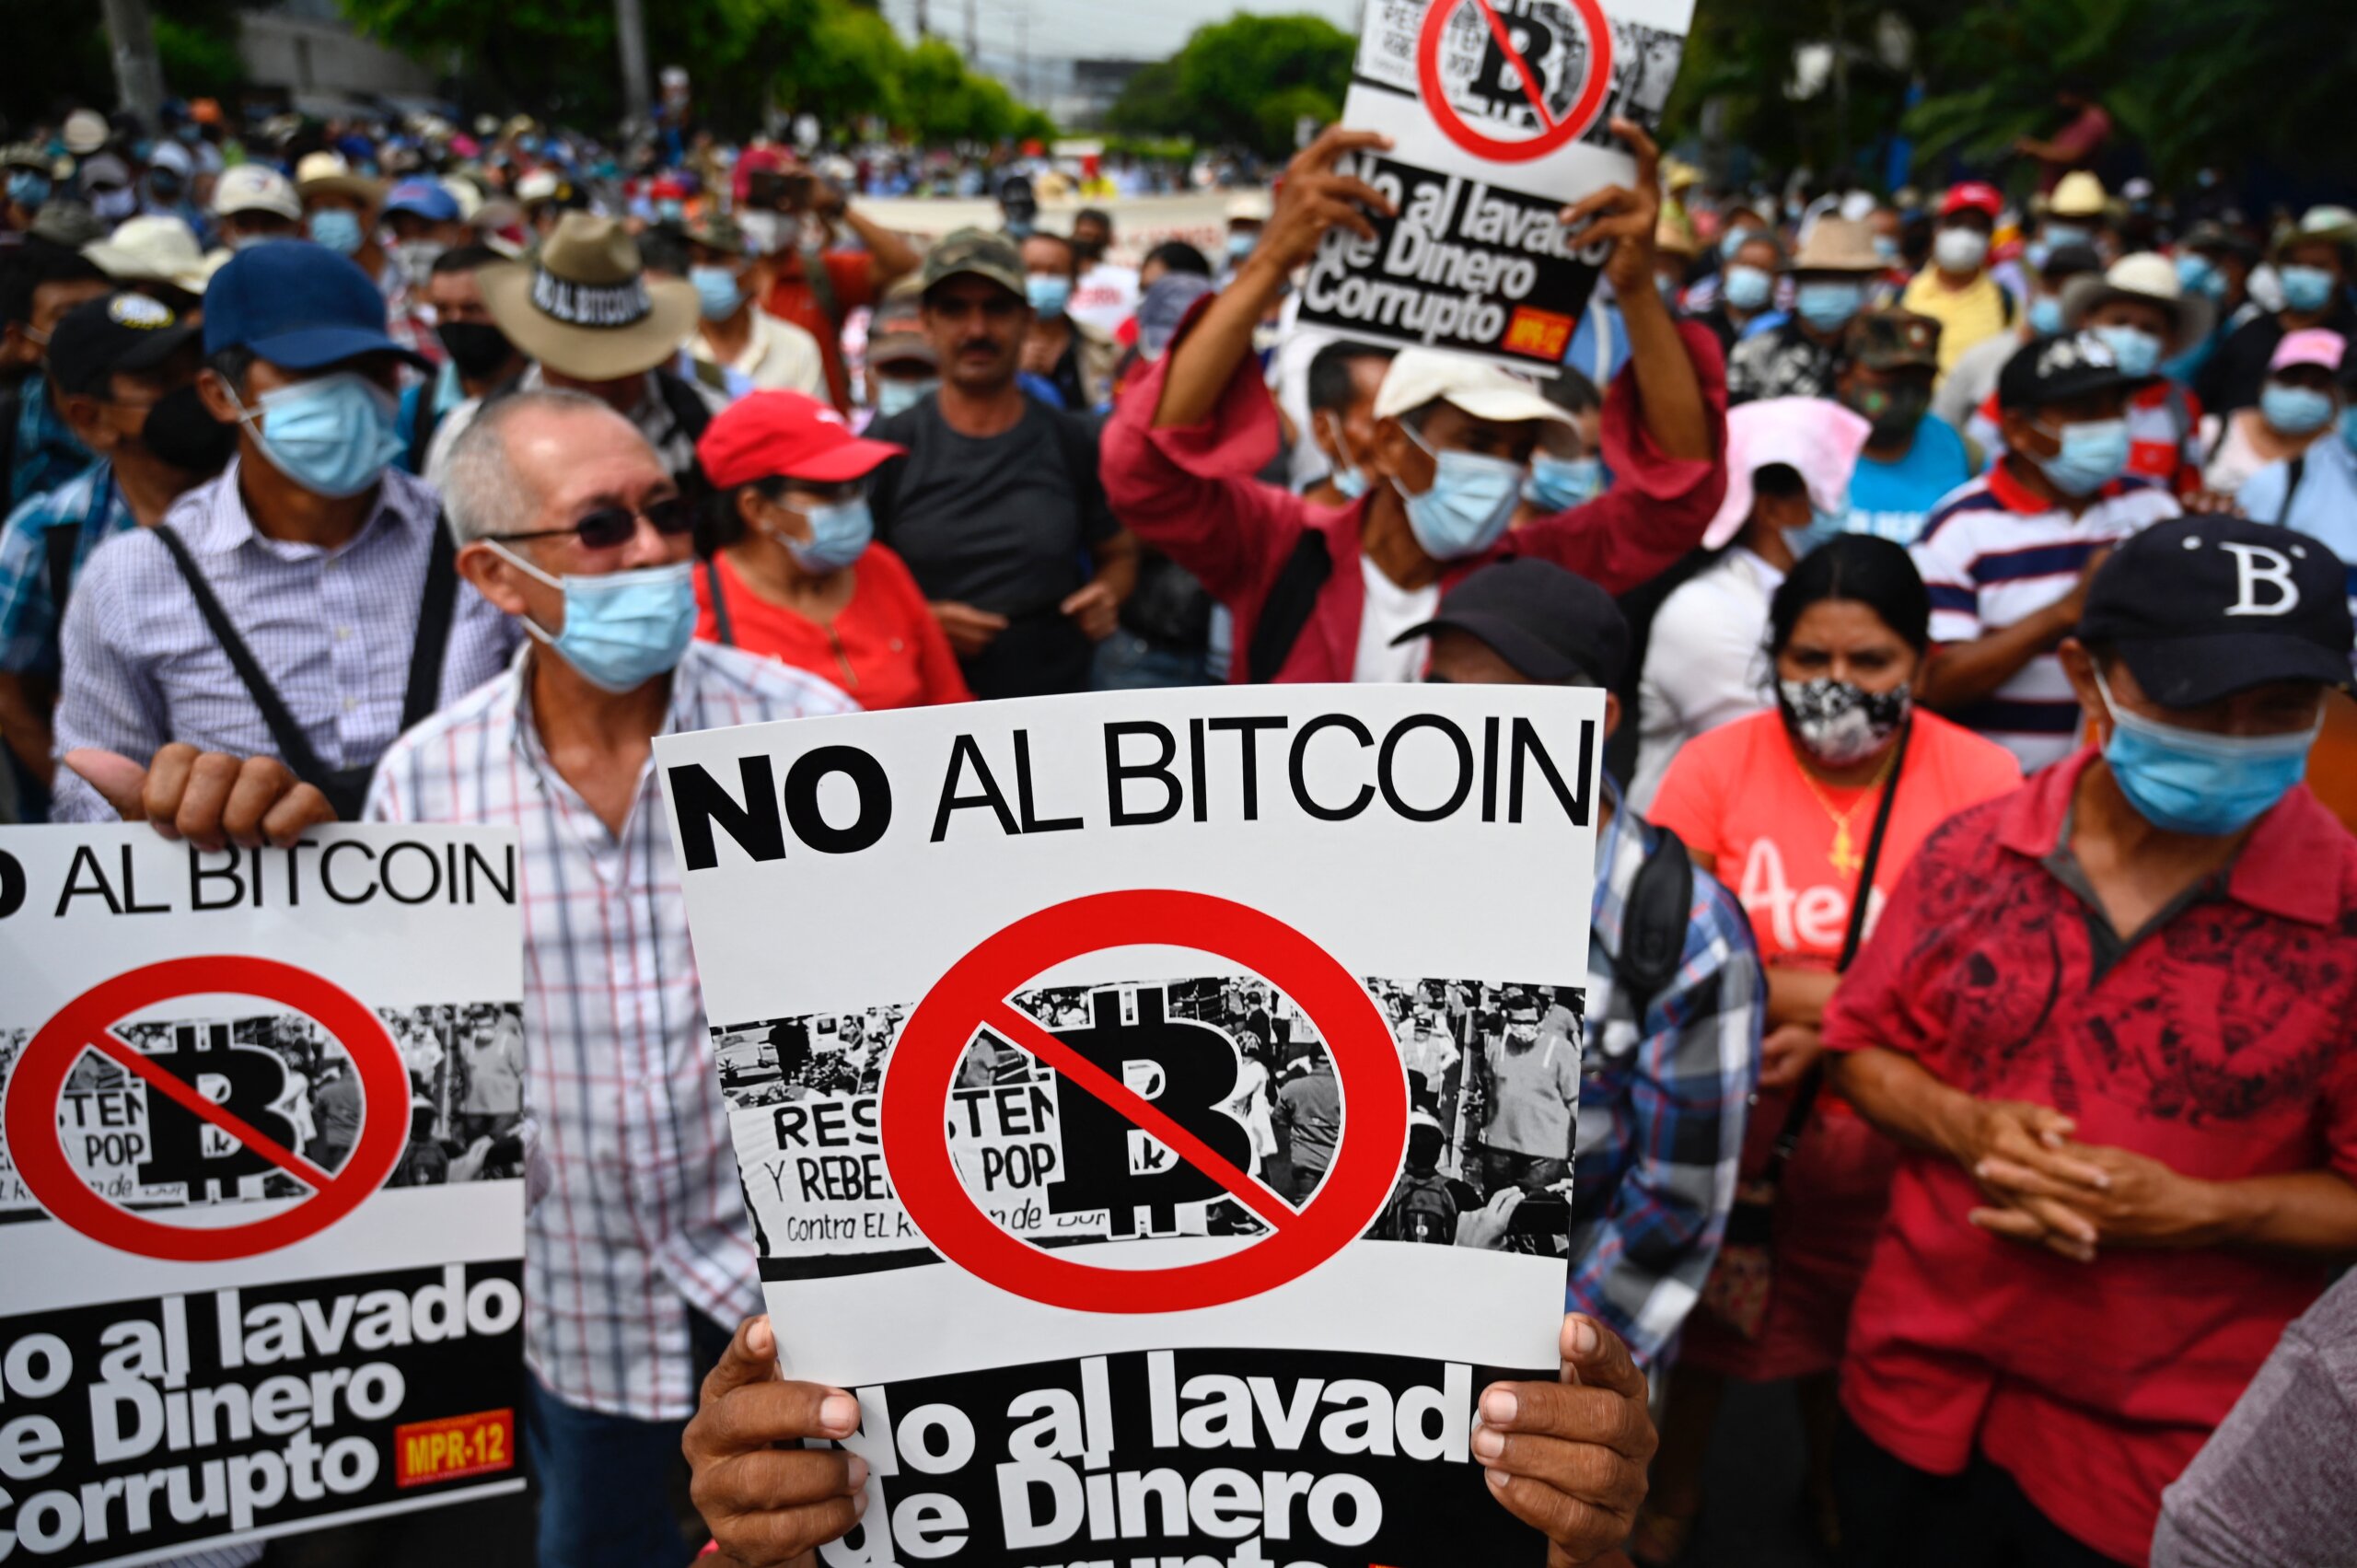 Most Salvadorans opposed the adoption of Bitcoin